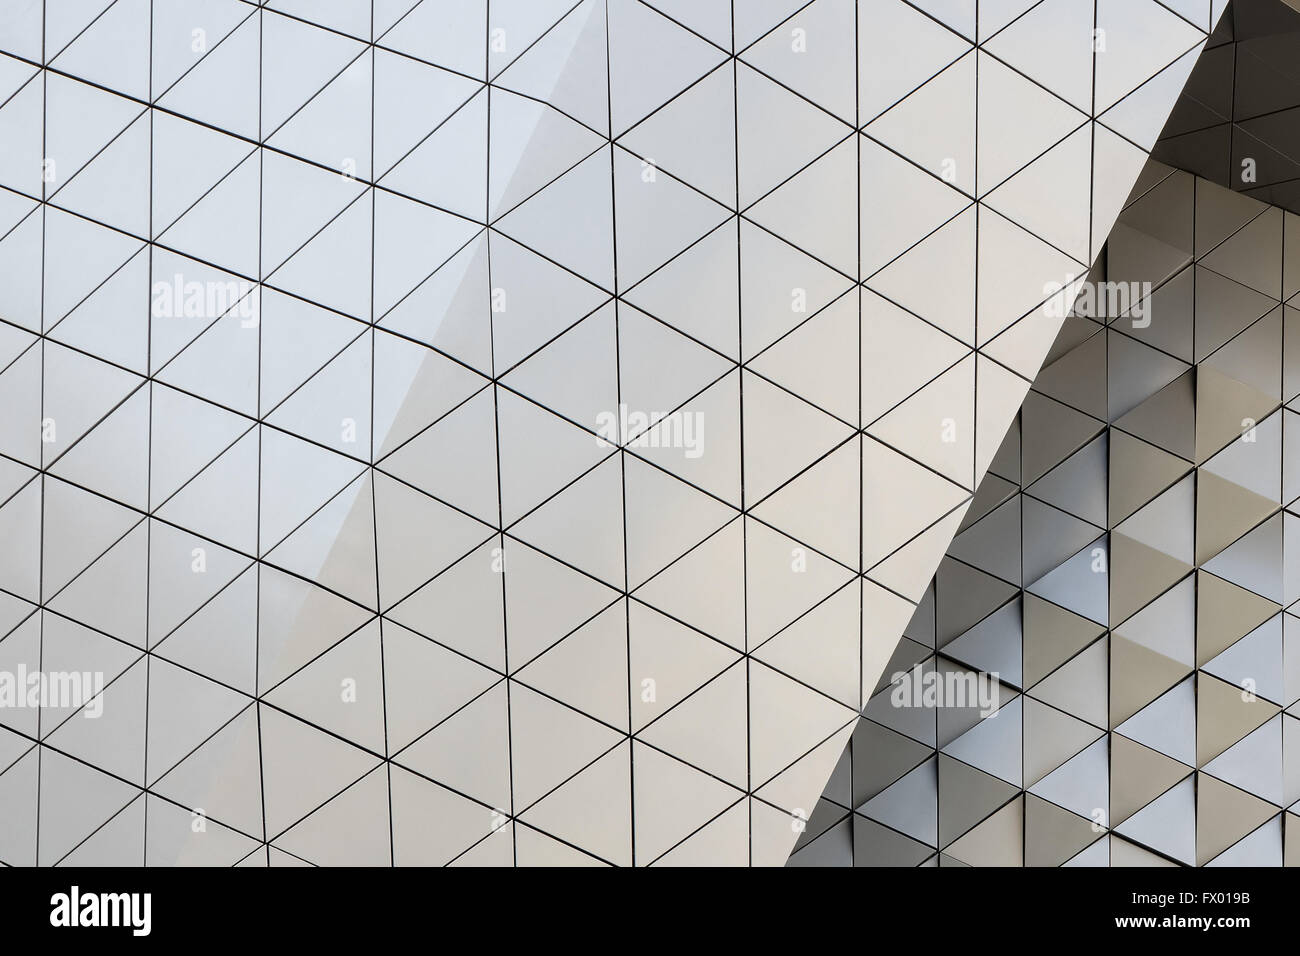 Abstract close-up view of modern aluminum ventilated facade of triangles Stock Photo